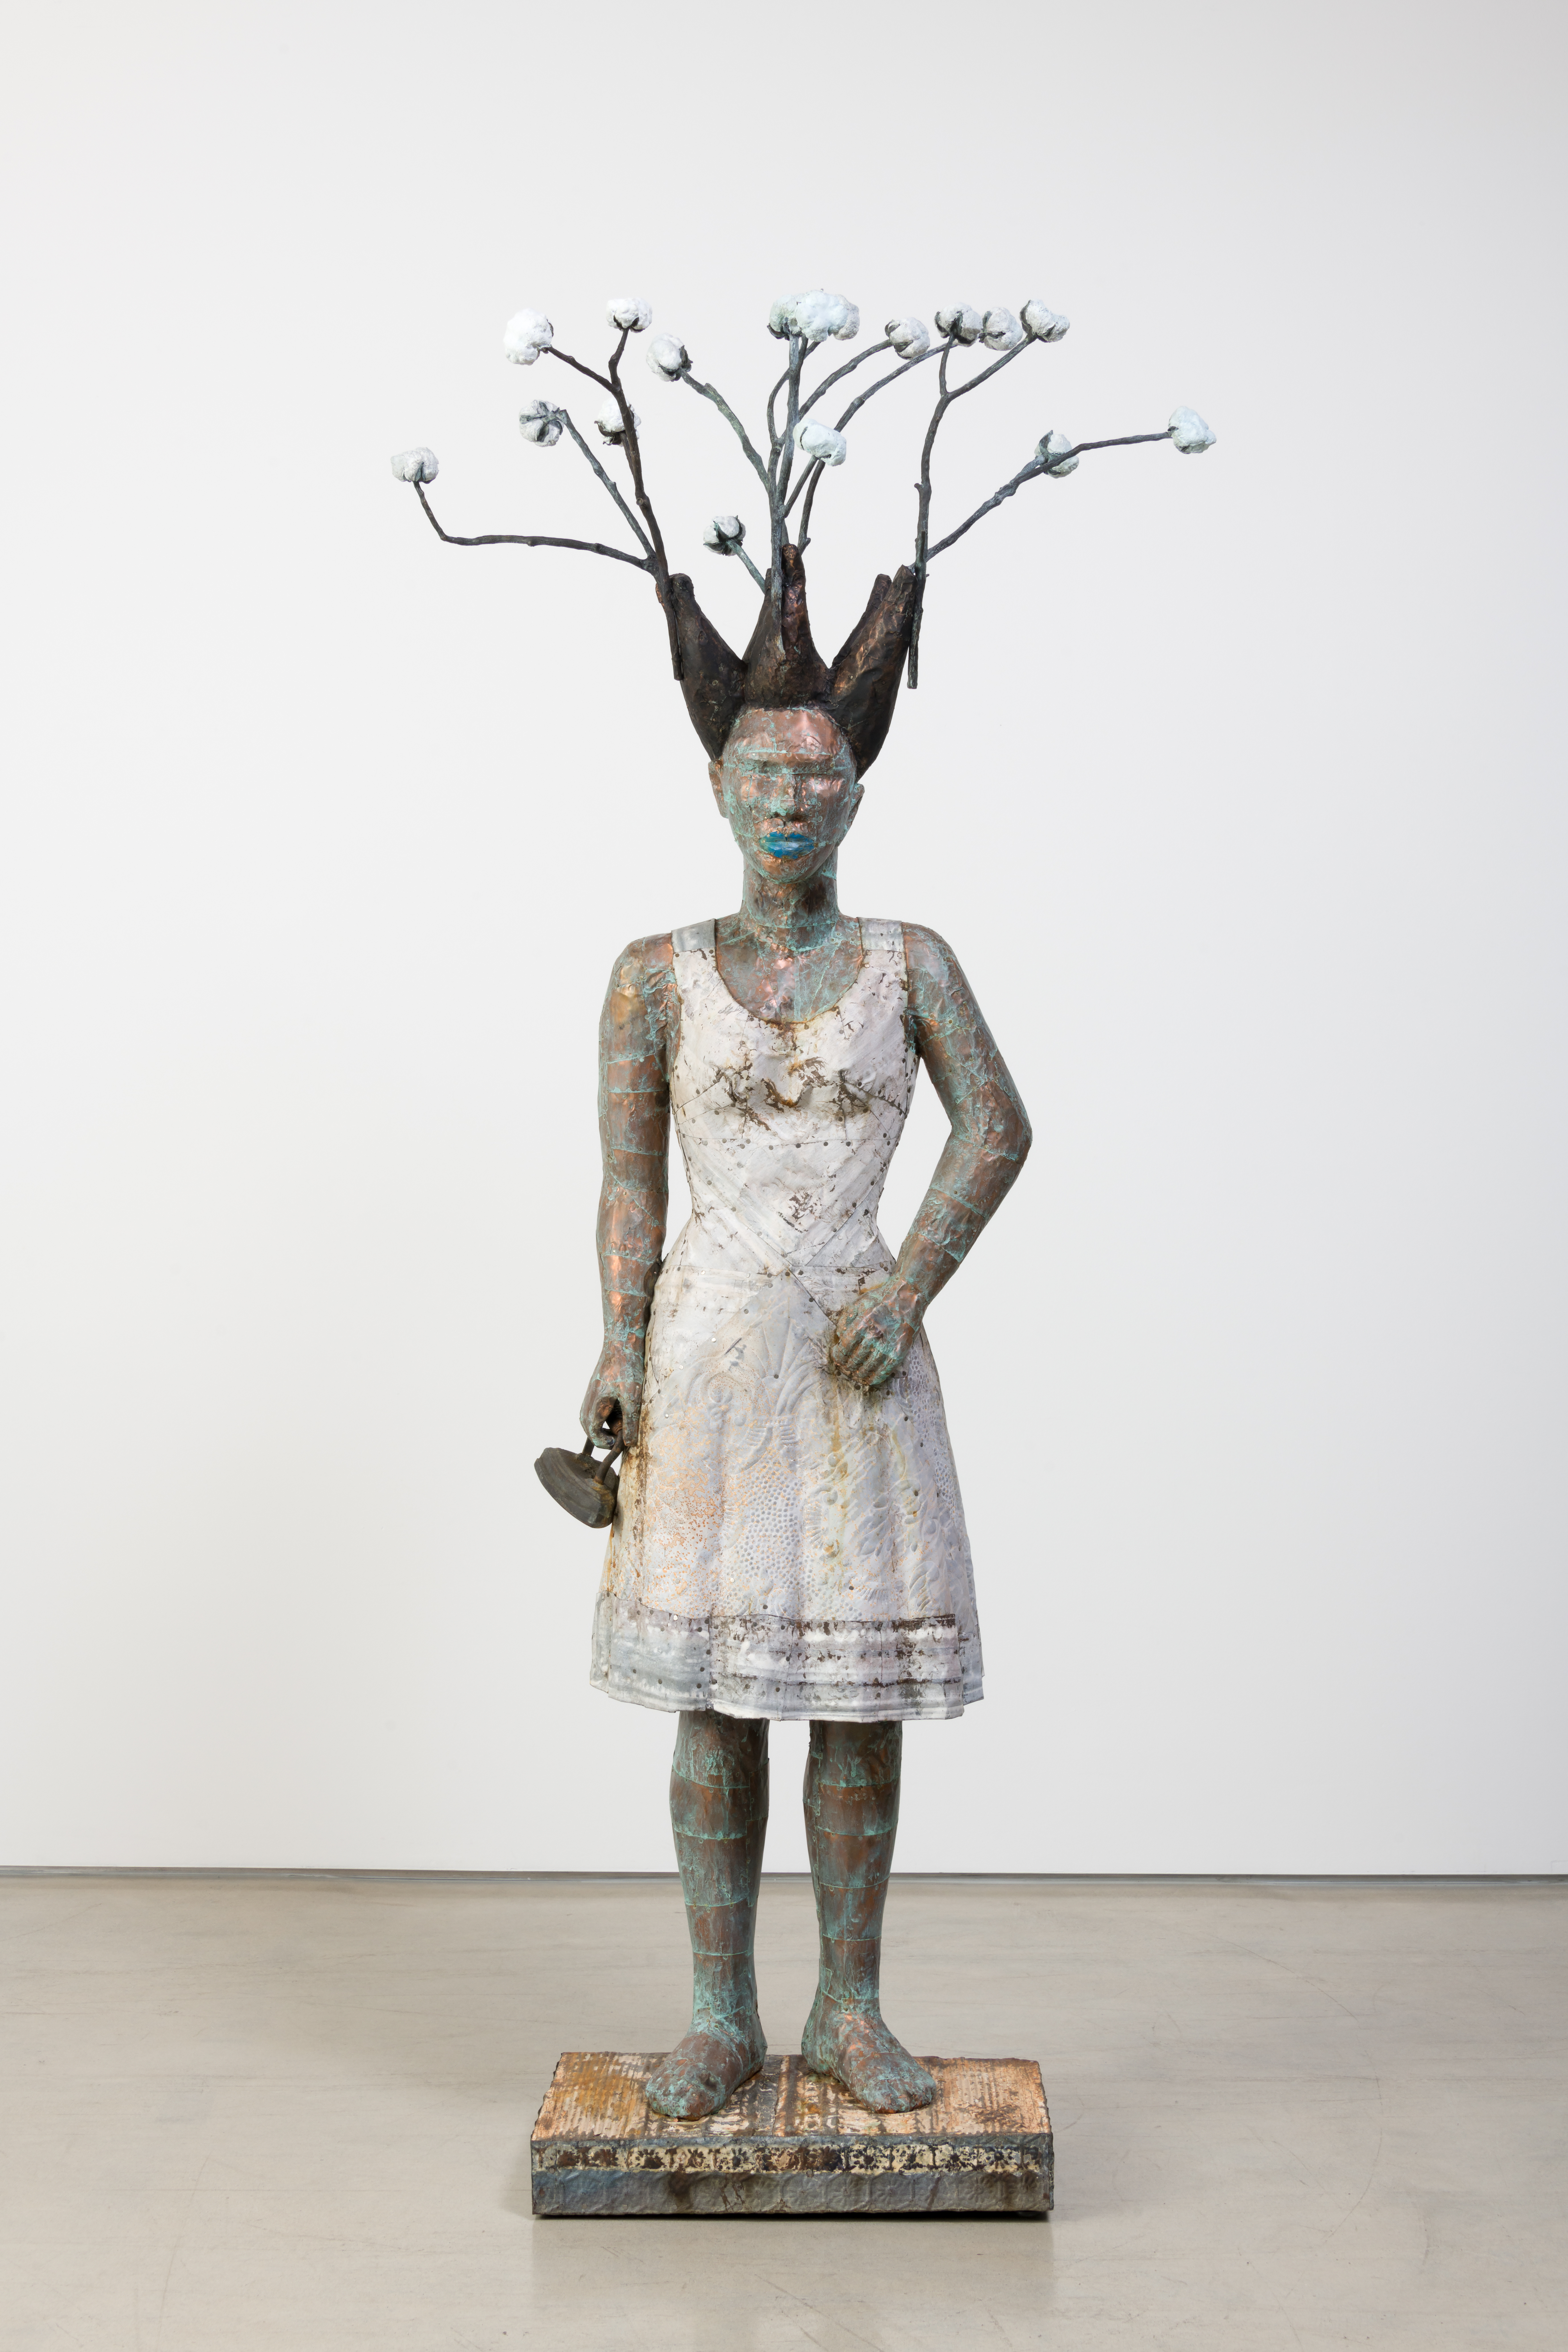 White Guise AIS18-19 A.jpg Alison Saar White Guise, 2018 wood, copper, ceiling tin, bronze and tar object: 91 x 40 x 30 in. Collection of Jordan D. Schnitzer (HIPM) Courtesy the artist